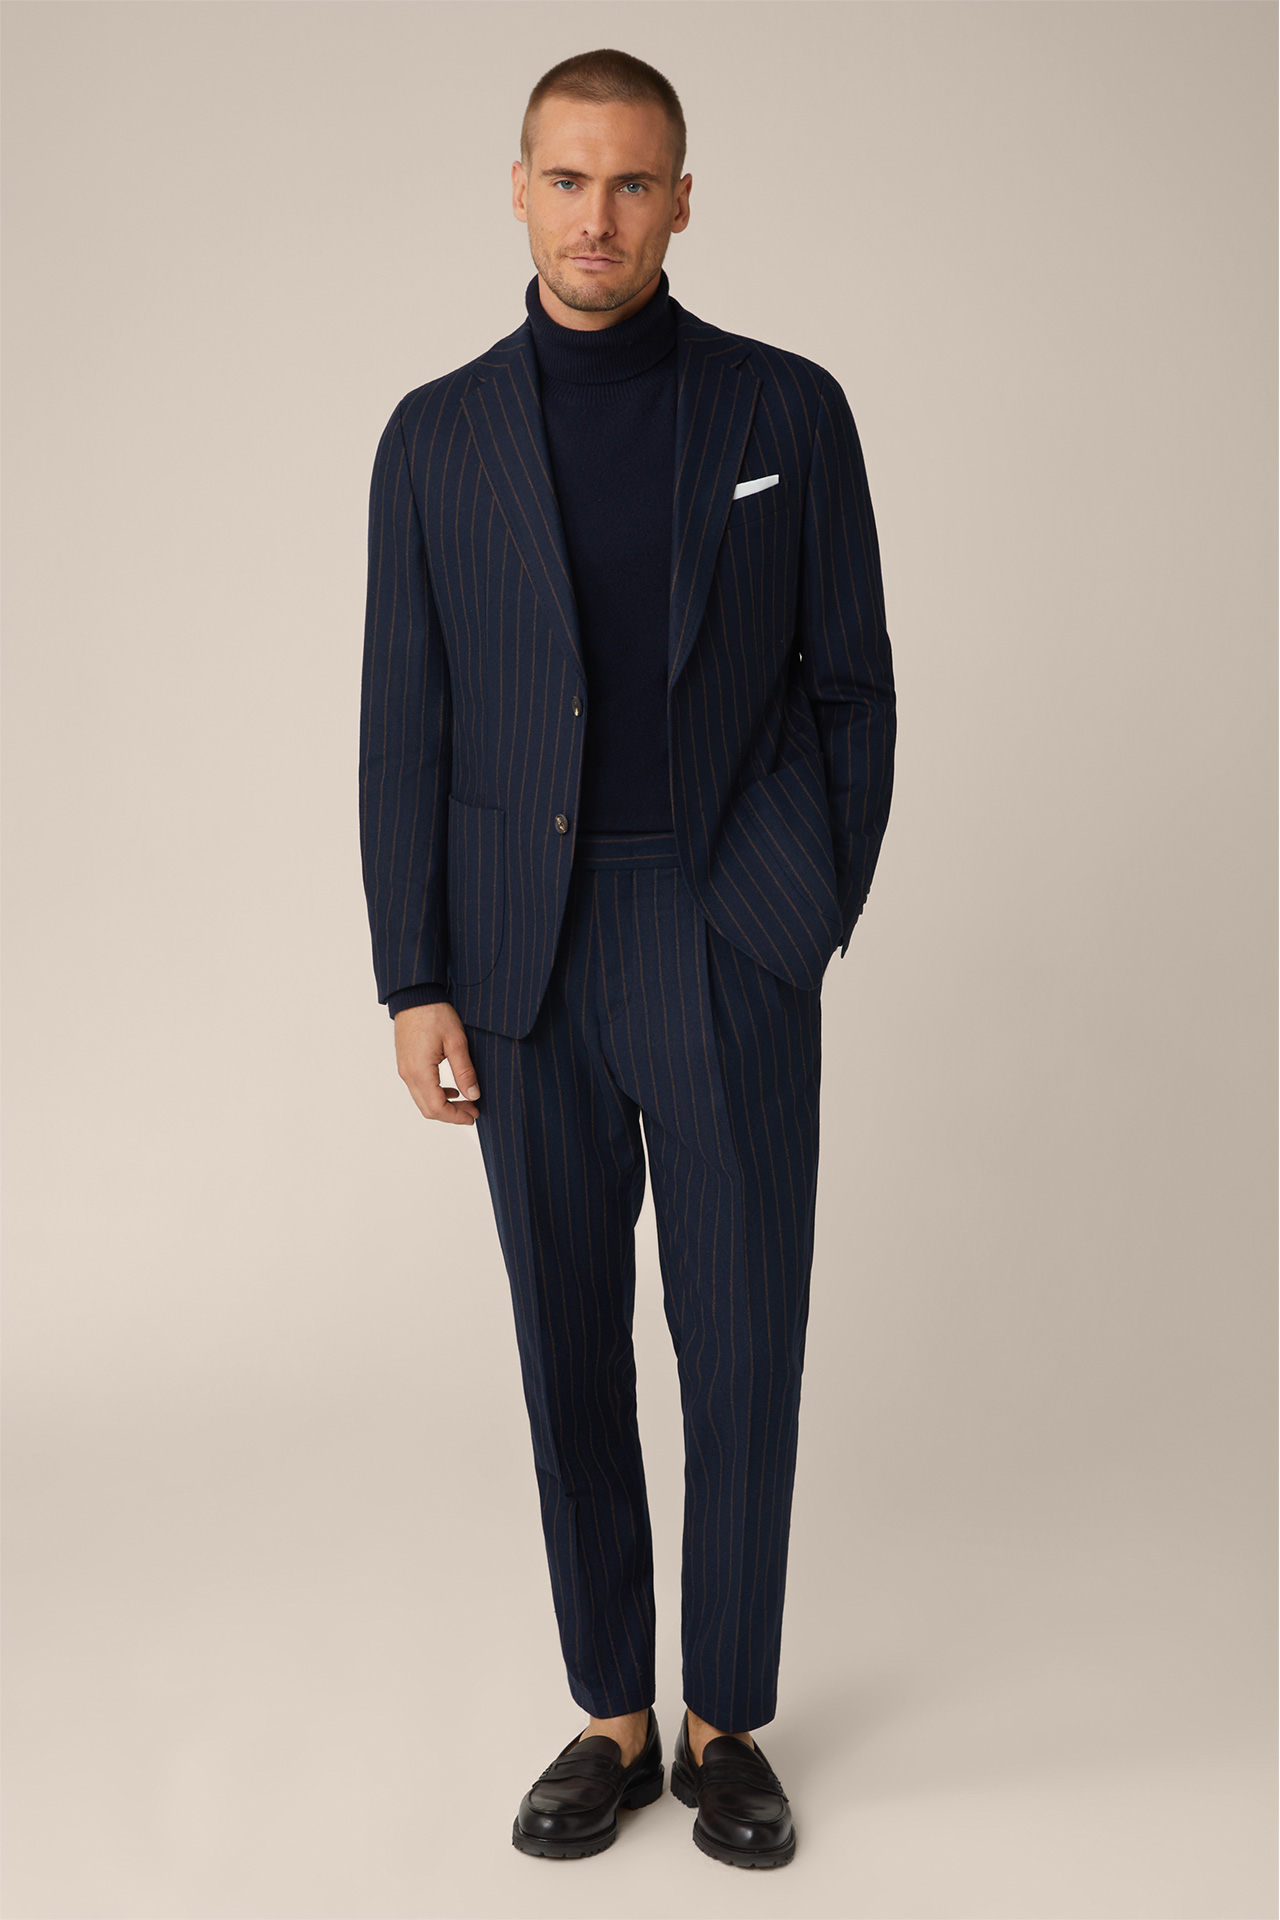 Sapo Wool Blend Modular Pleat-front Trousers in Navy with Brown Pinstripes